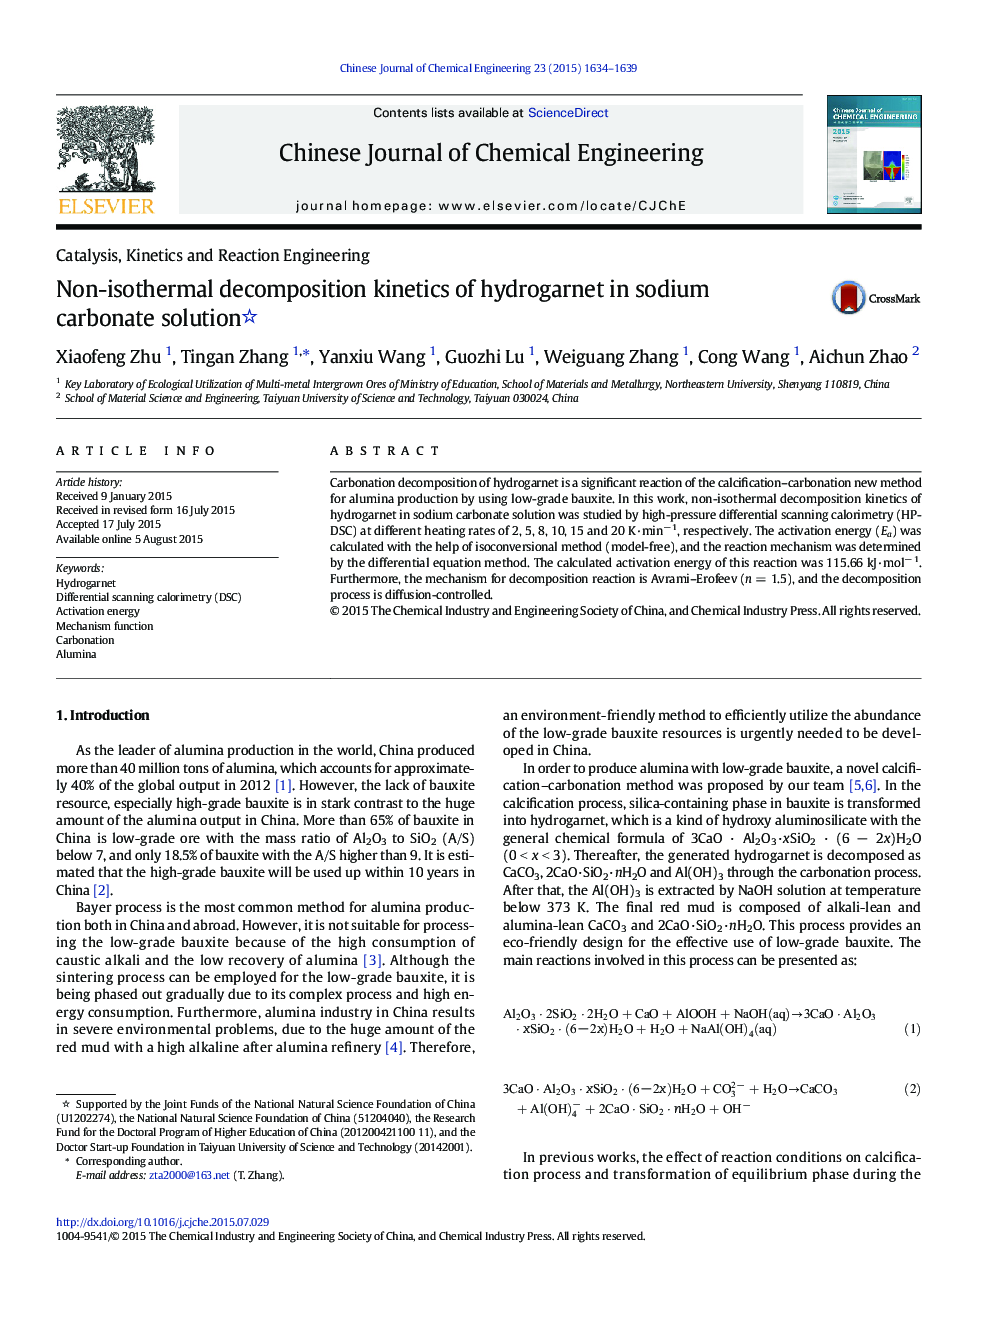 Non-isothermal decomposition kinetics of hydrogarnet in sodium carbonate solution 